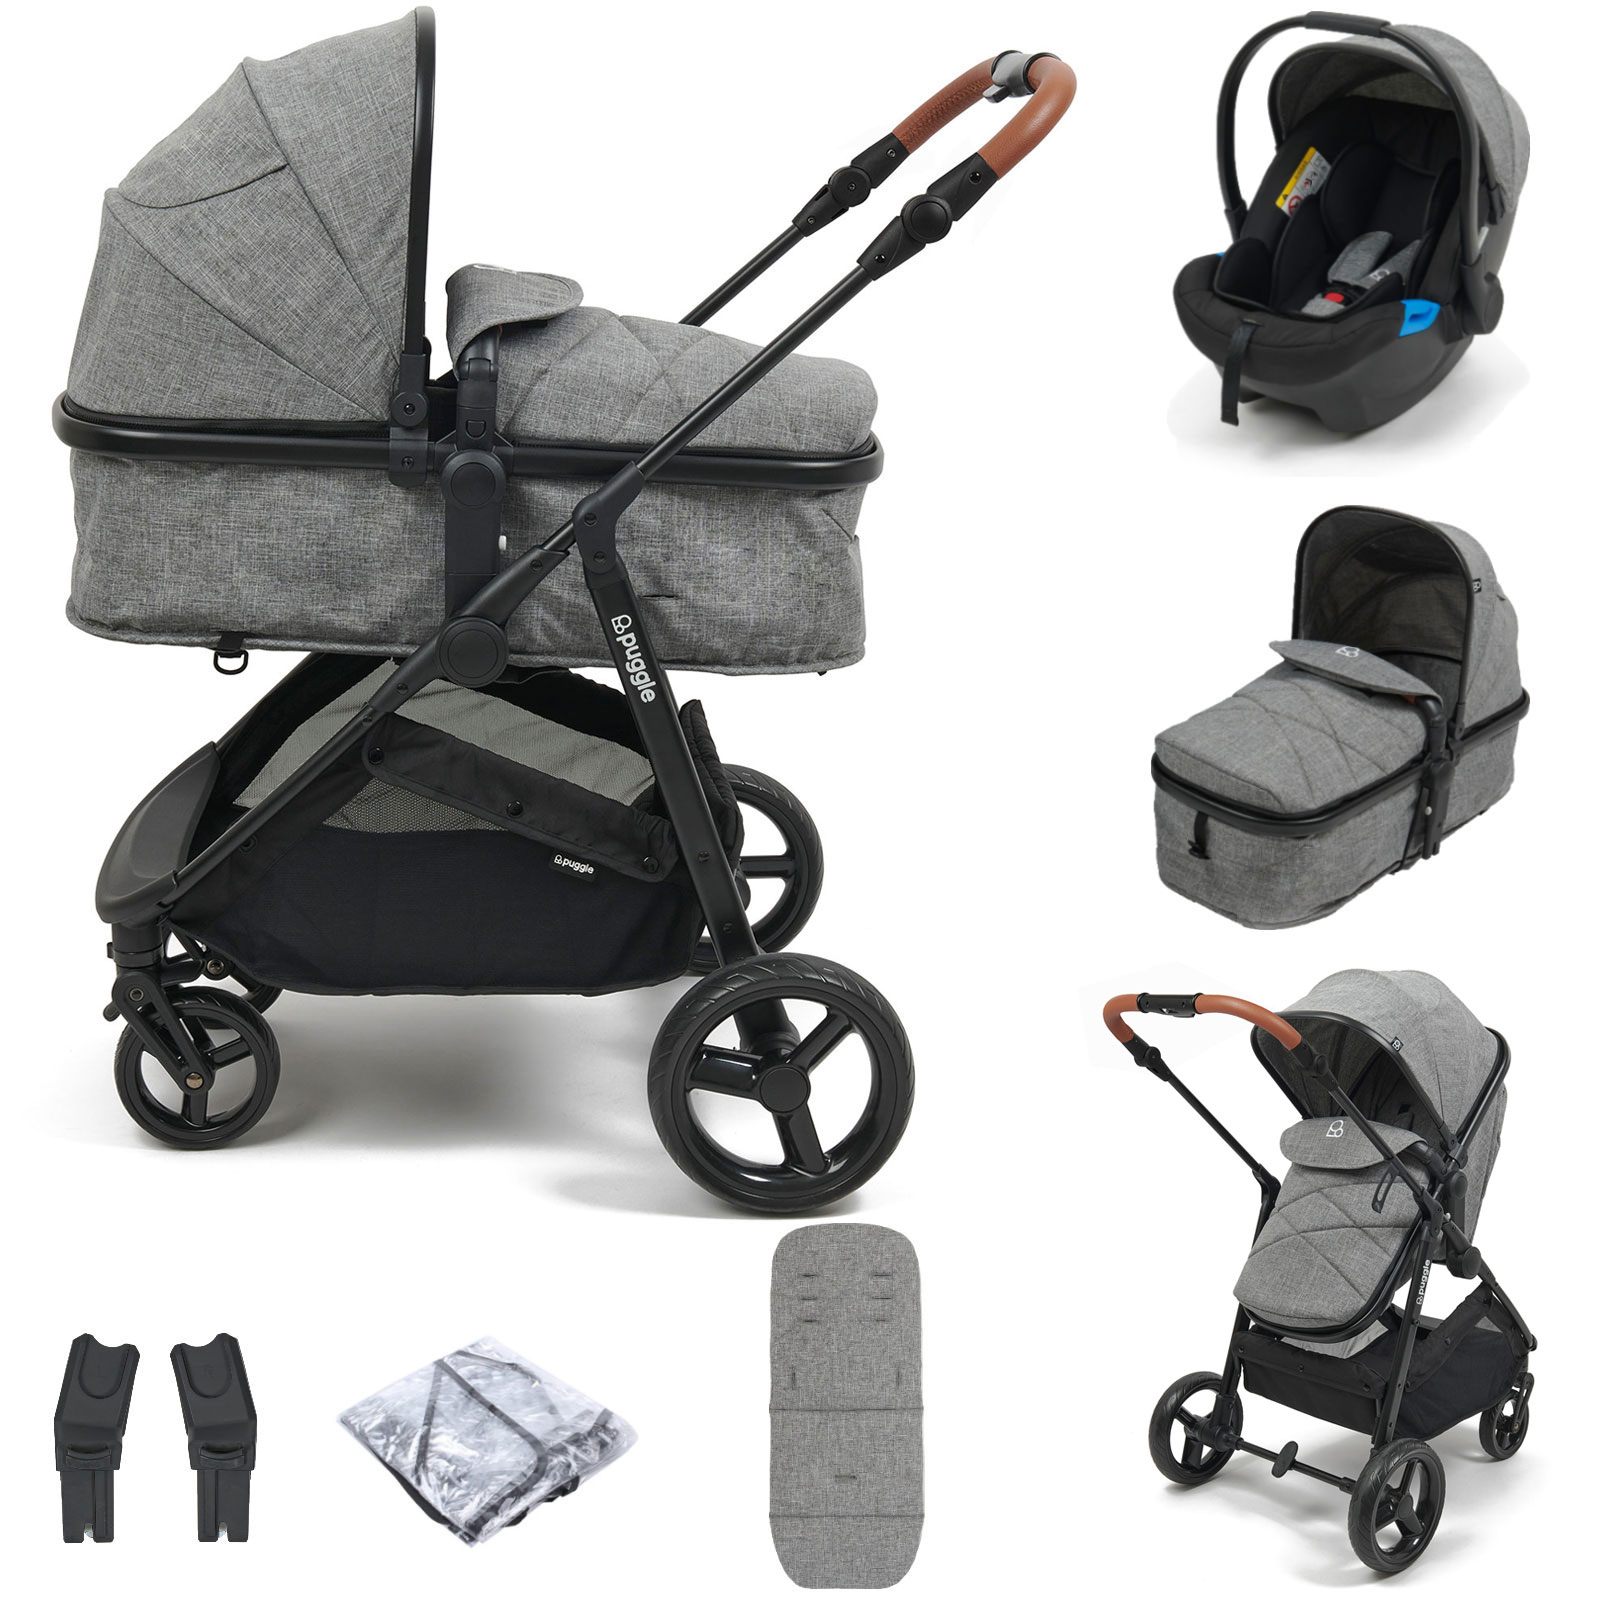 Puggle Monaco XT 2in1 Pushchair With Adjustable Handle Travel System - Graphite Grey